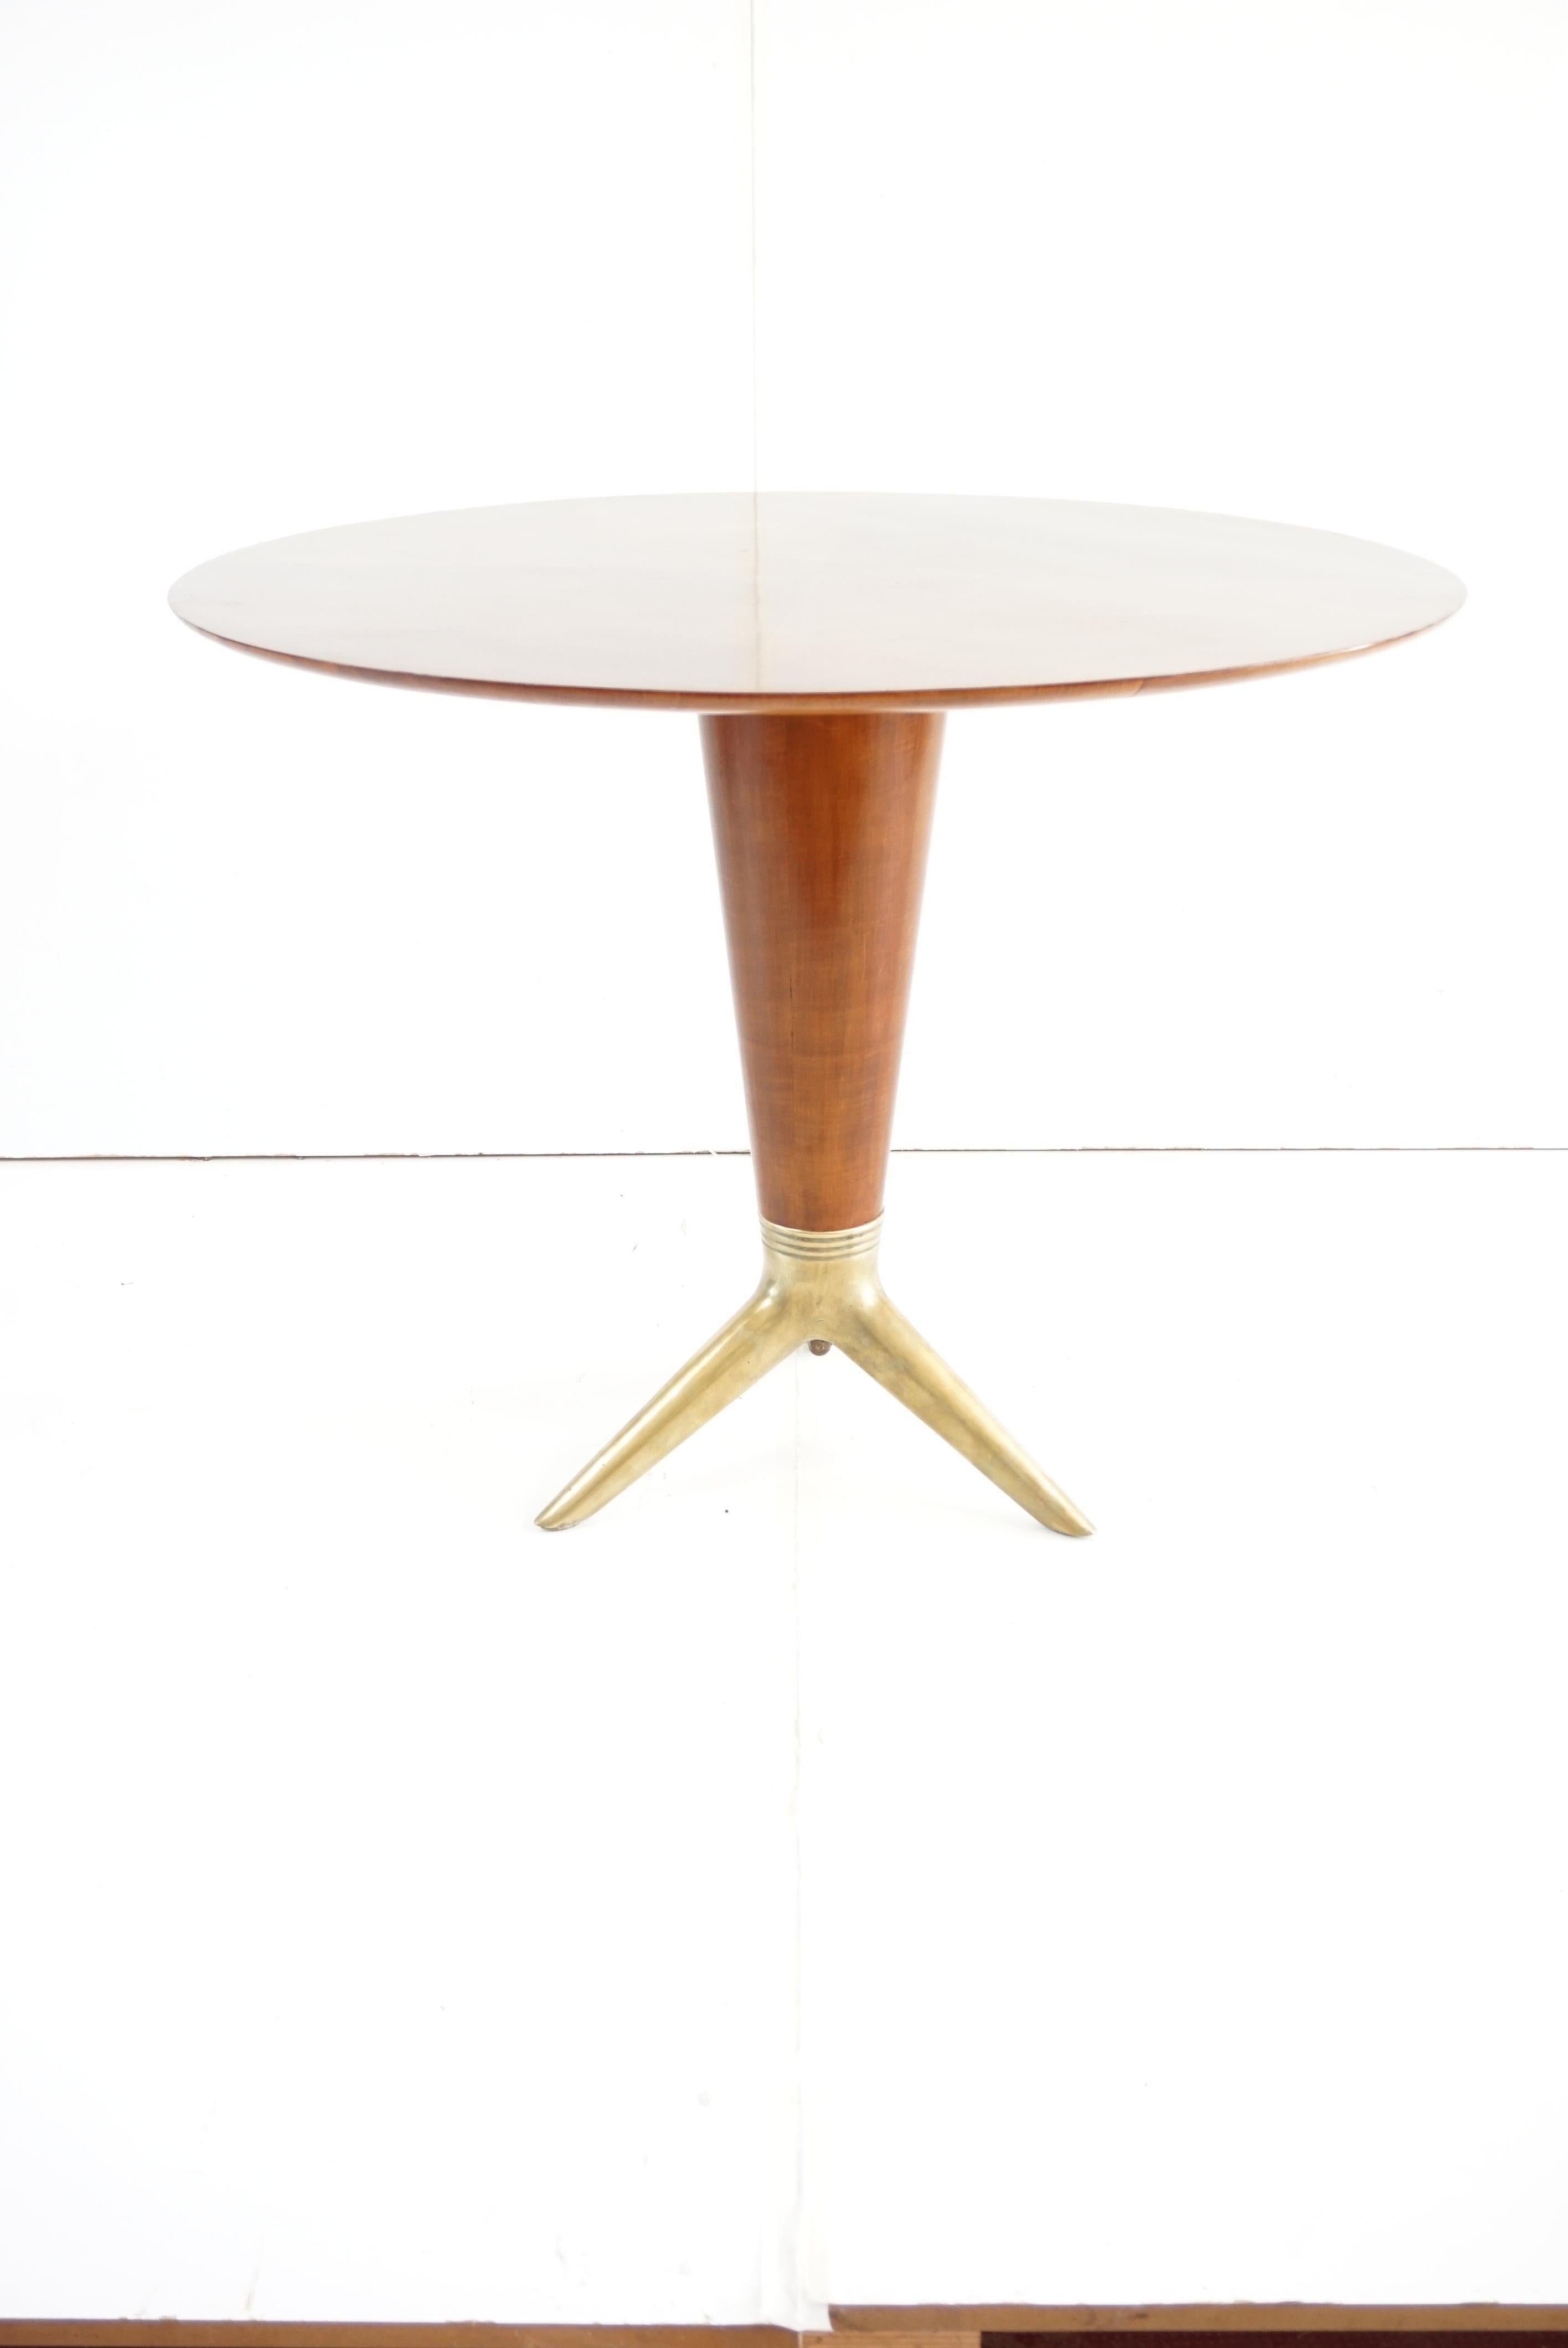 Rare Maple and Brass Round Center Table by I.S.A. Bergamo 1950 For Sale 2